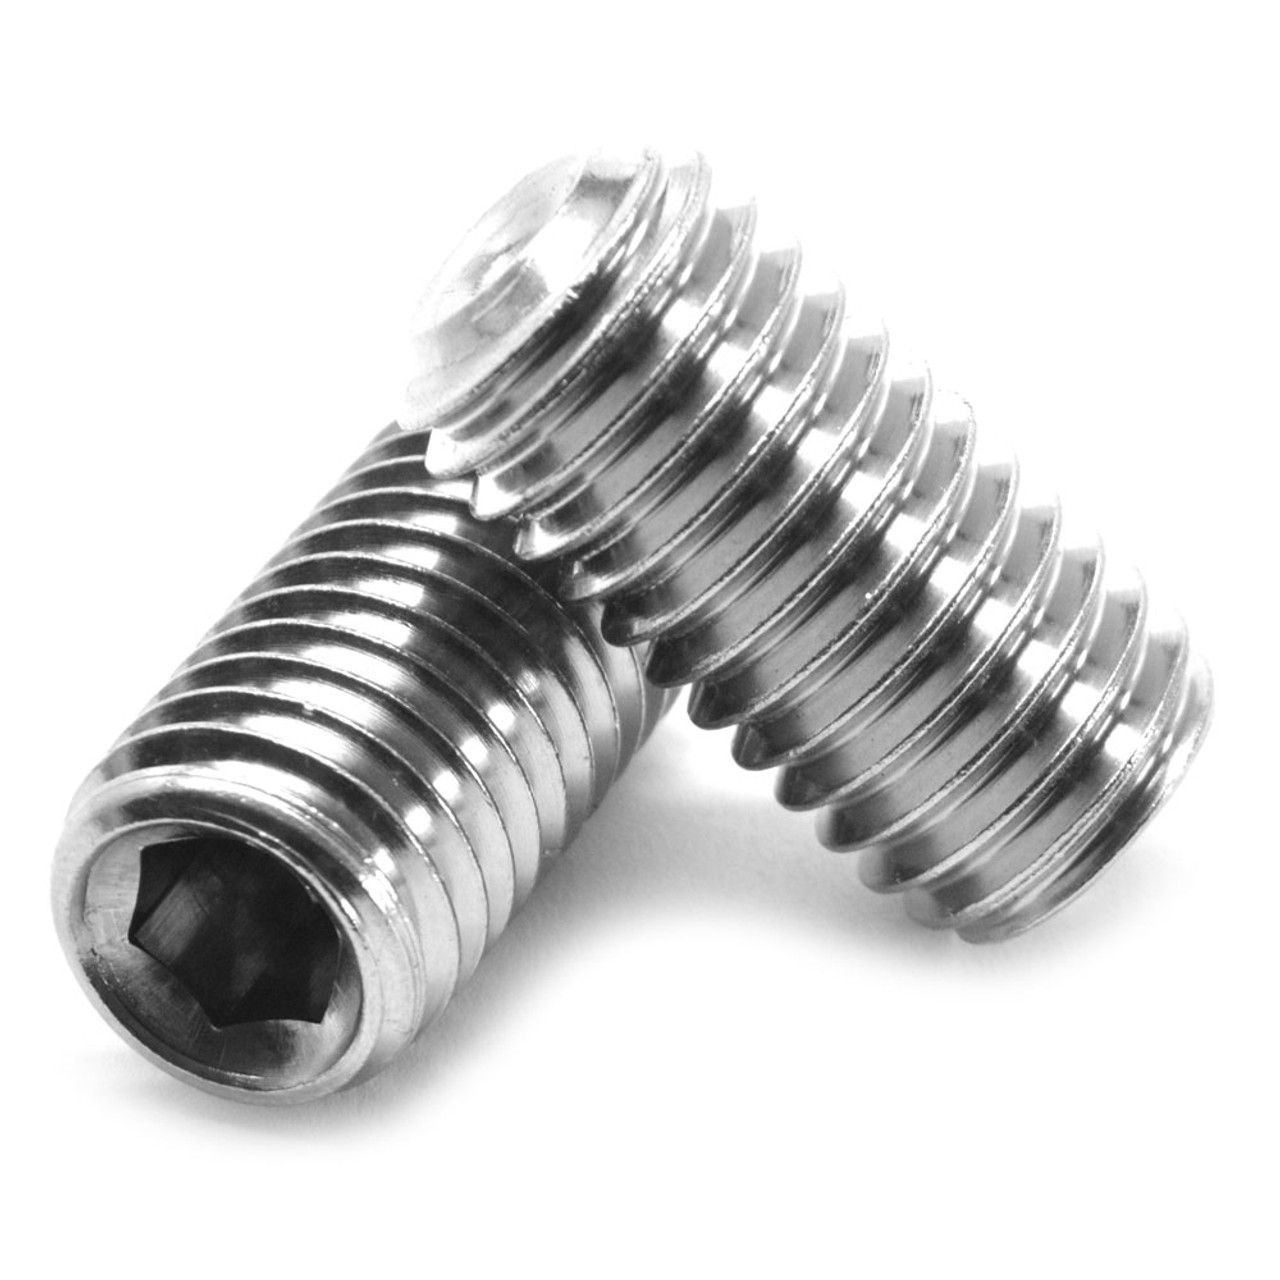 #10-24 x 1/2" Coarse Thread Socket Set Screw Cup Point Stainless Steel 18-8